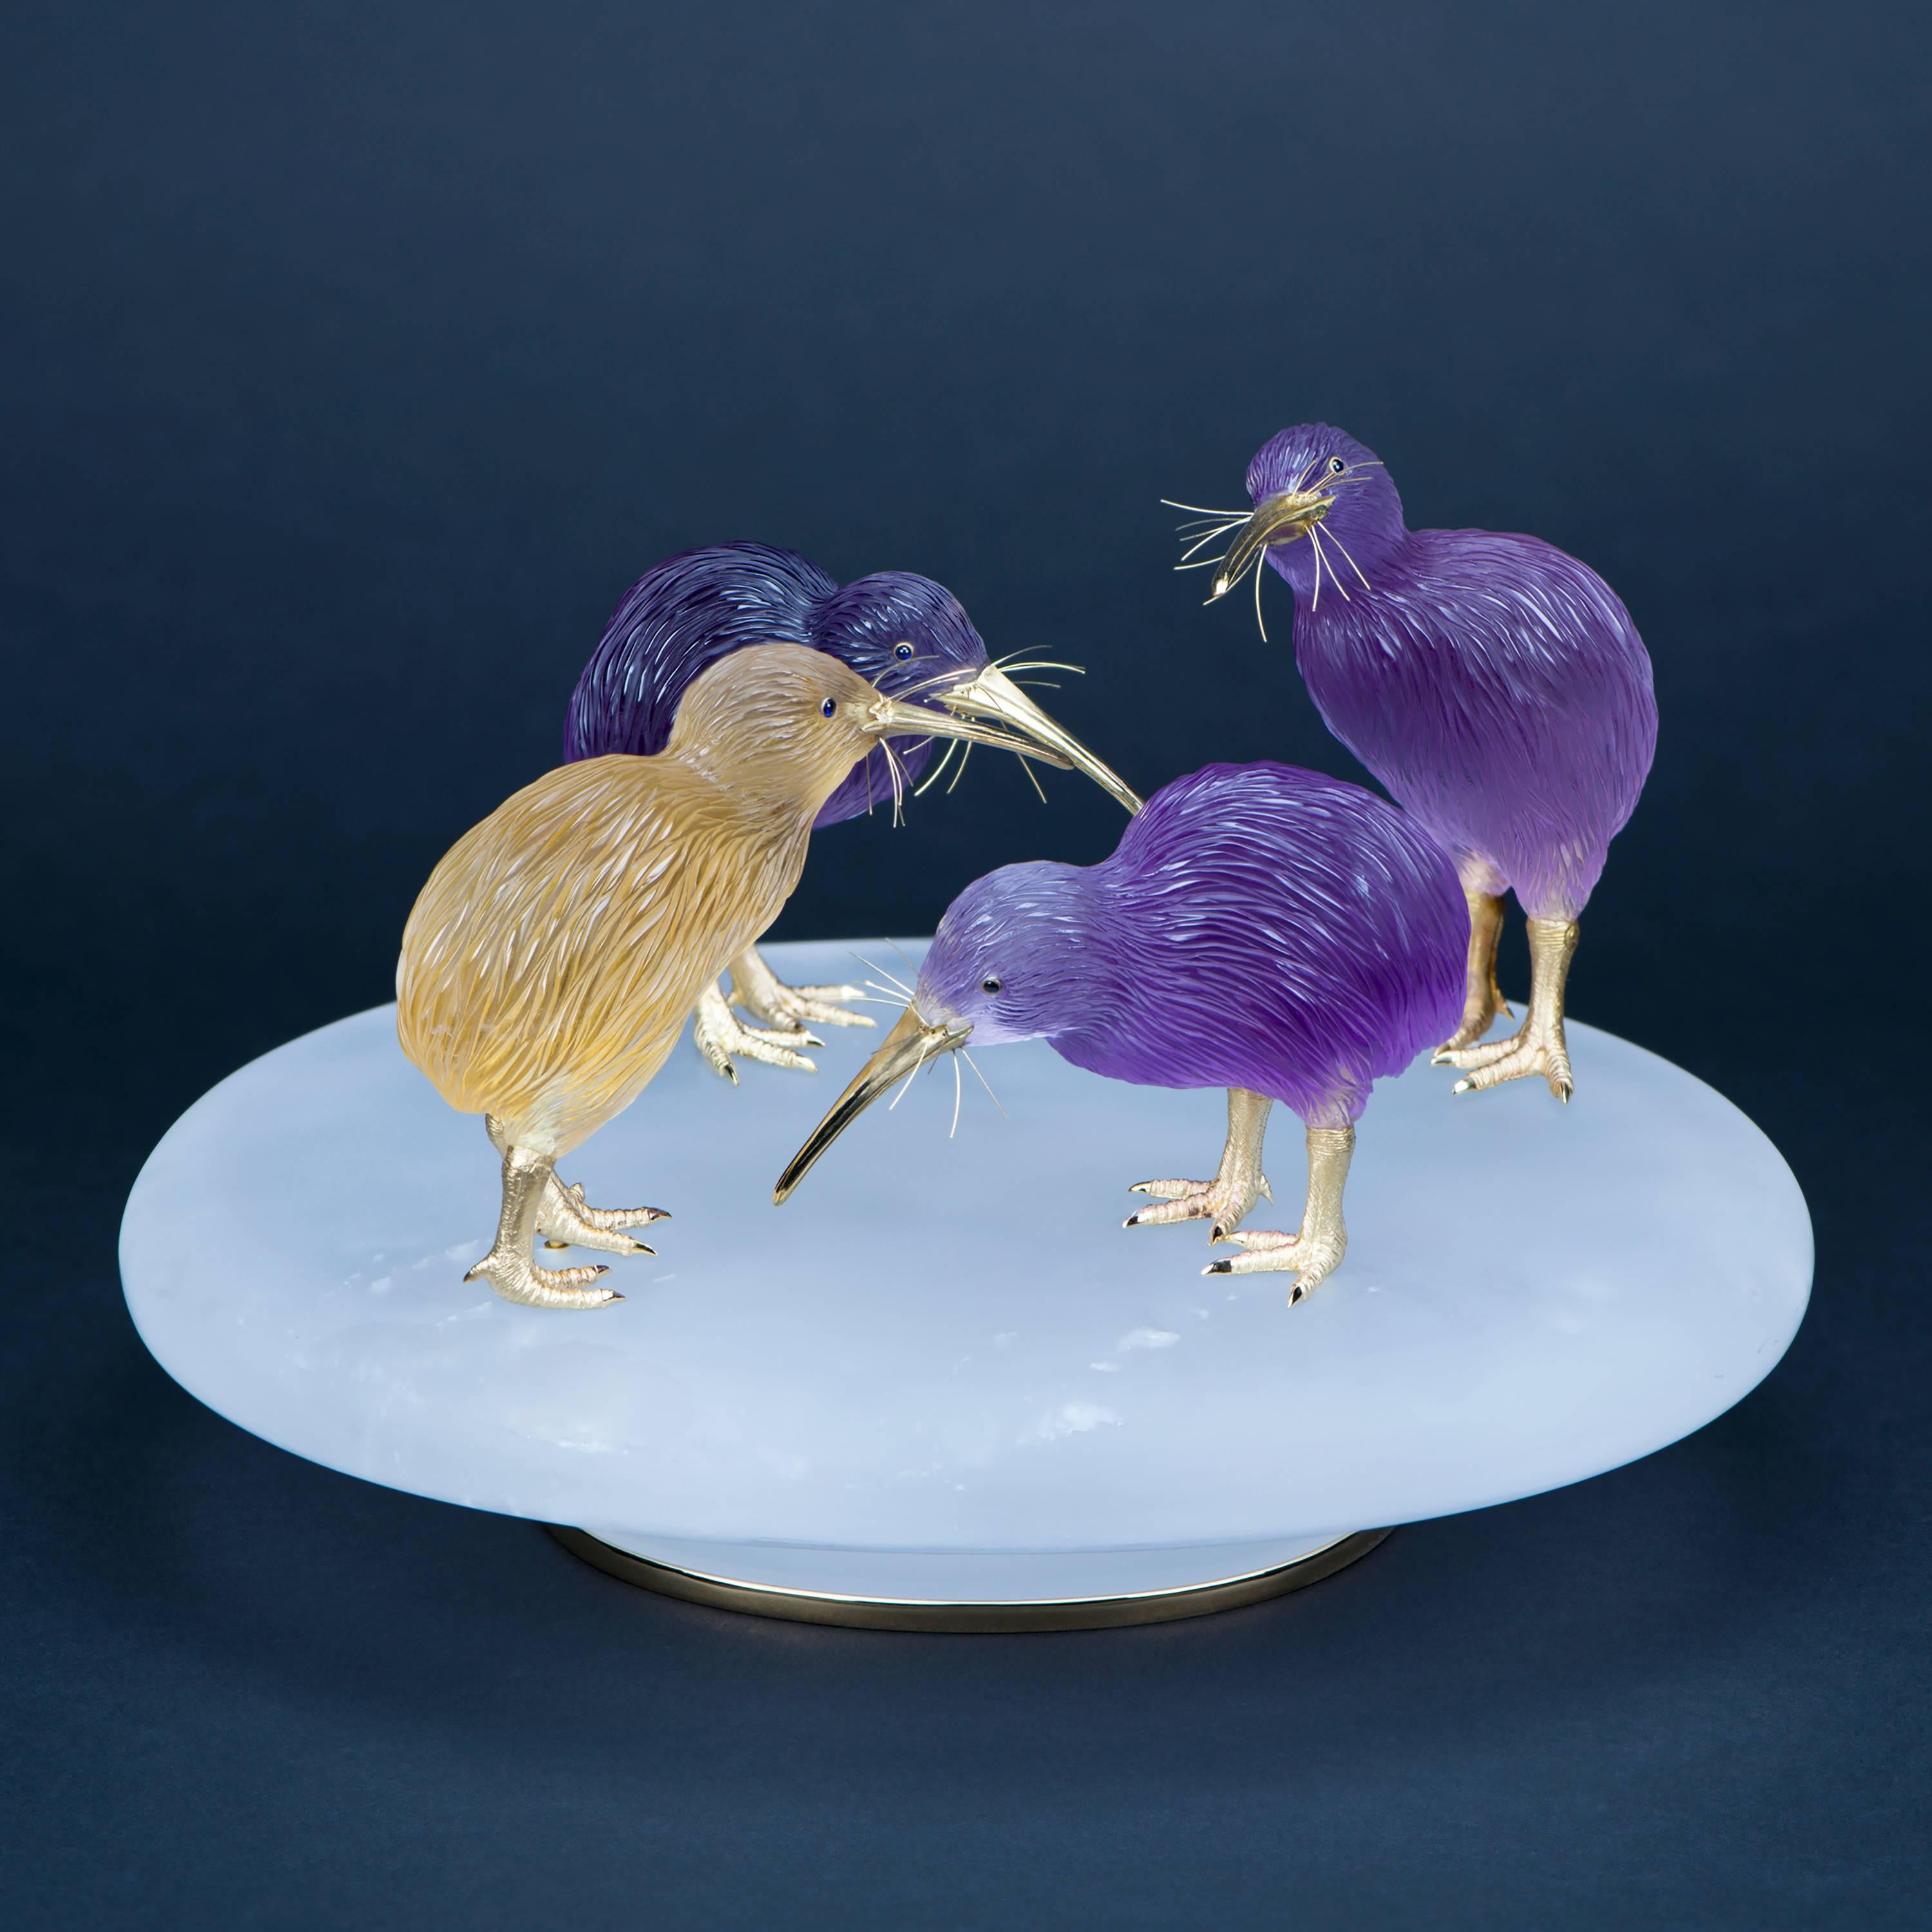 This endearing and beautifully rendered group of kiwis is the perfect centrepiece for a table or sideboard at home, or a creative office desk. 
Carved by hand, the piece features a trio of kiwis in precious amethyst and a single citrine bird, all